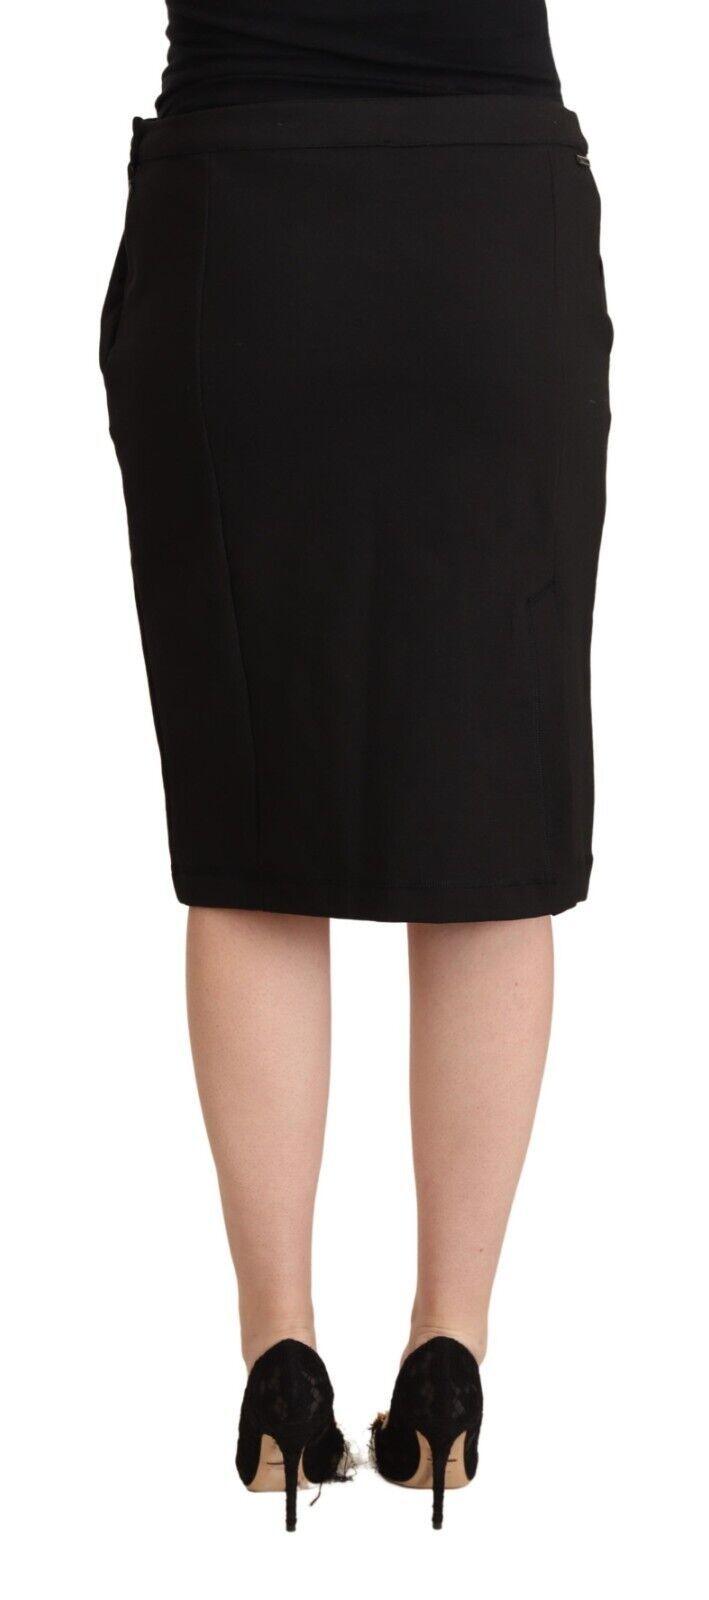 GF Ferre Black Straight Pencil Cut Knee Length Skirt - Designed by GF Ferre Available to Buy at a Discounted Price on Moon Behind The Hill Online Designer Discount Store